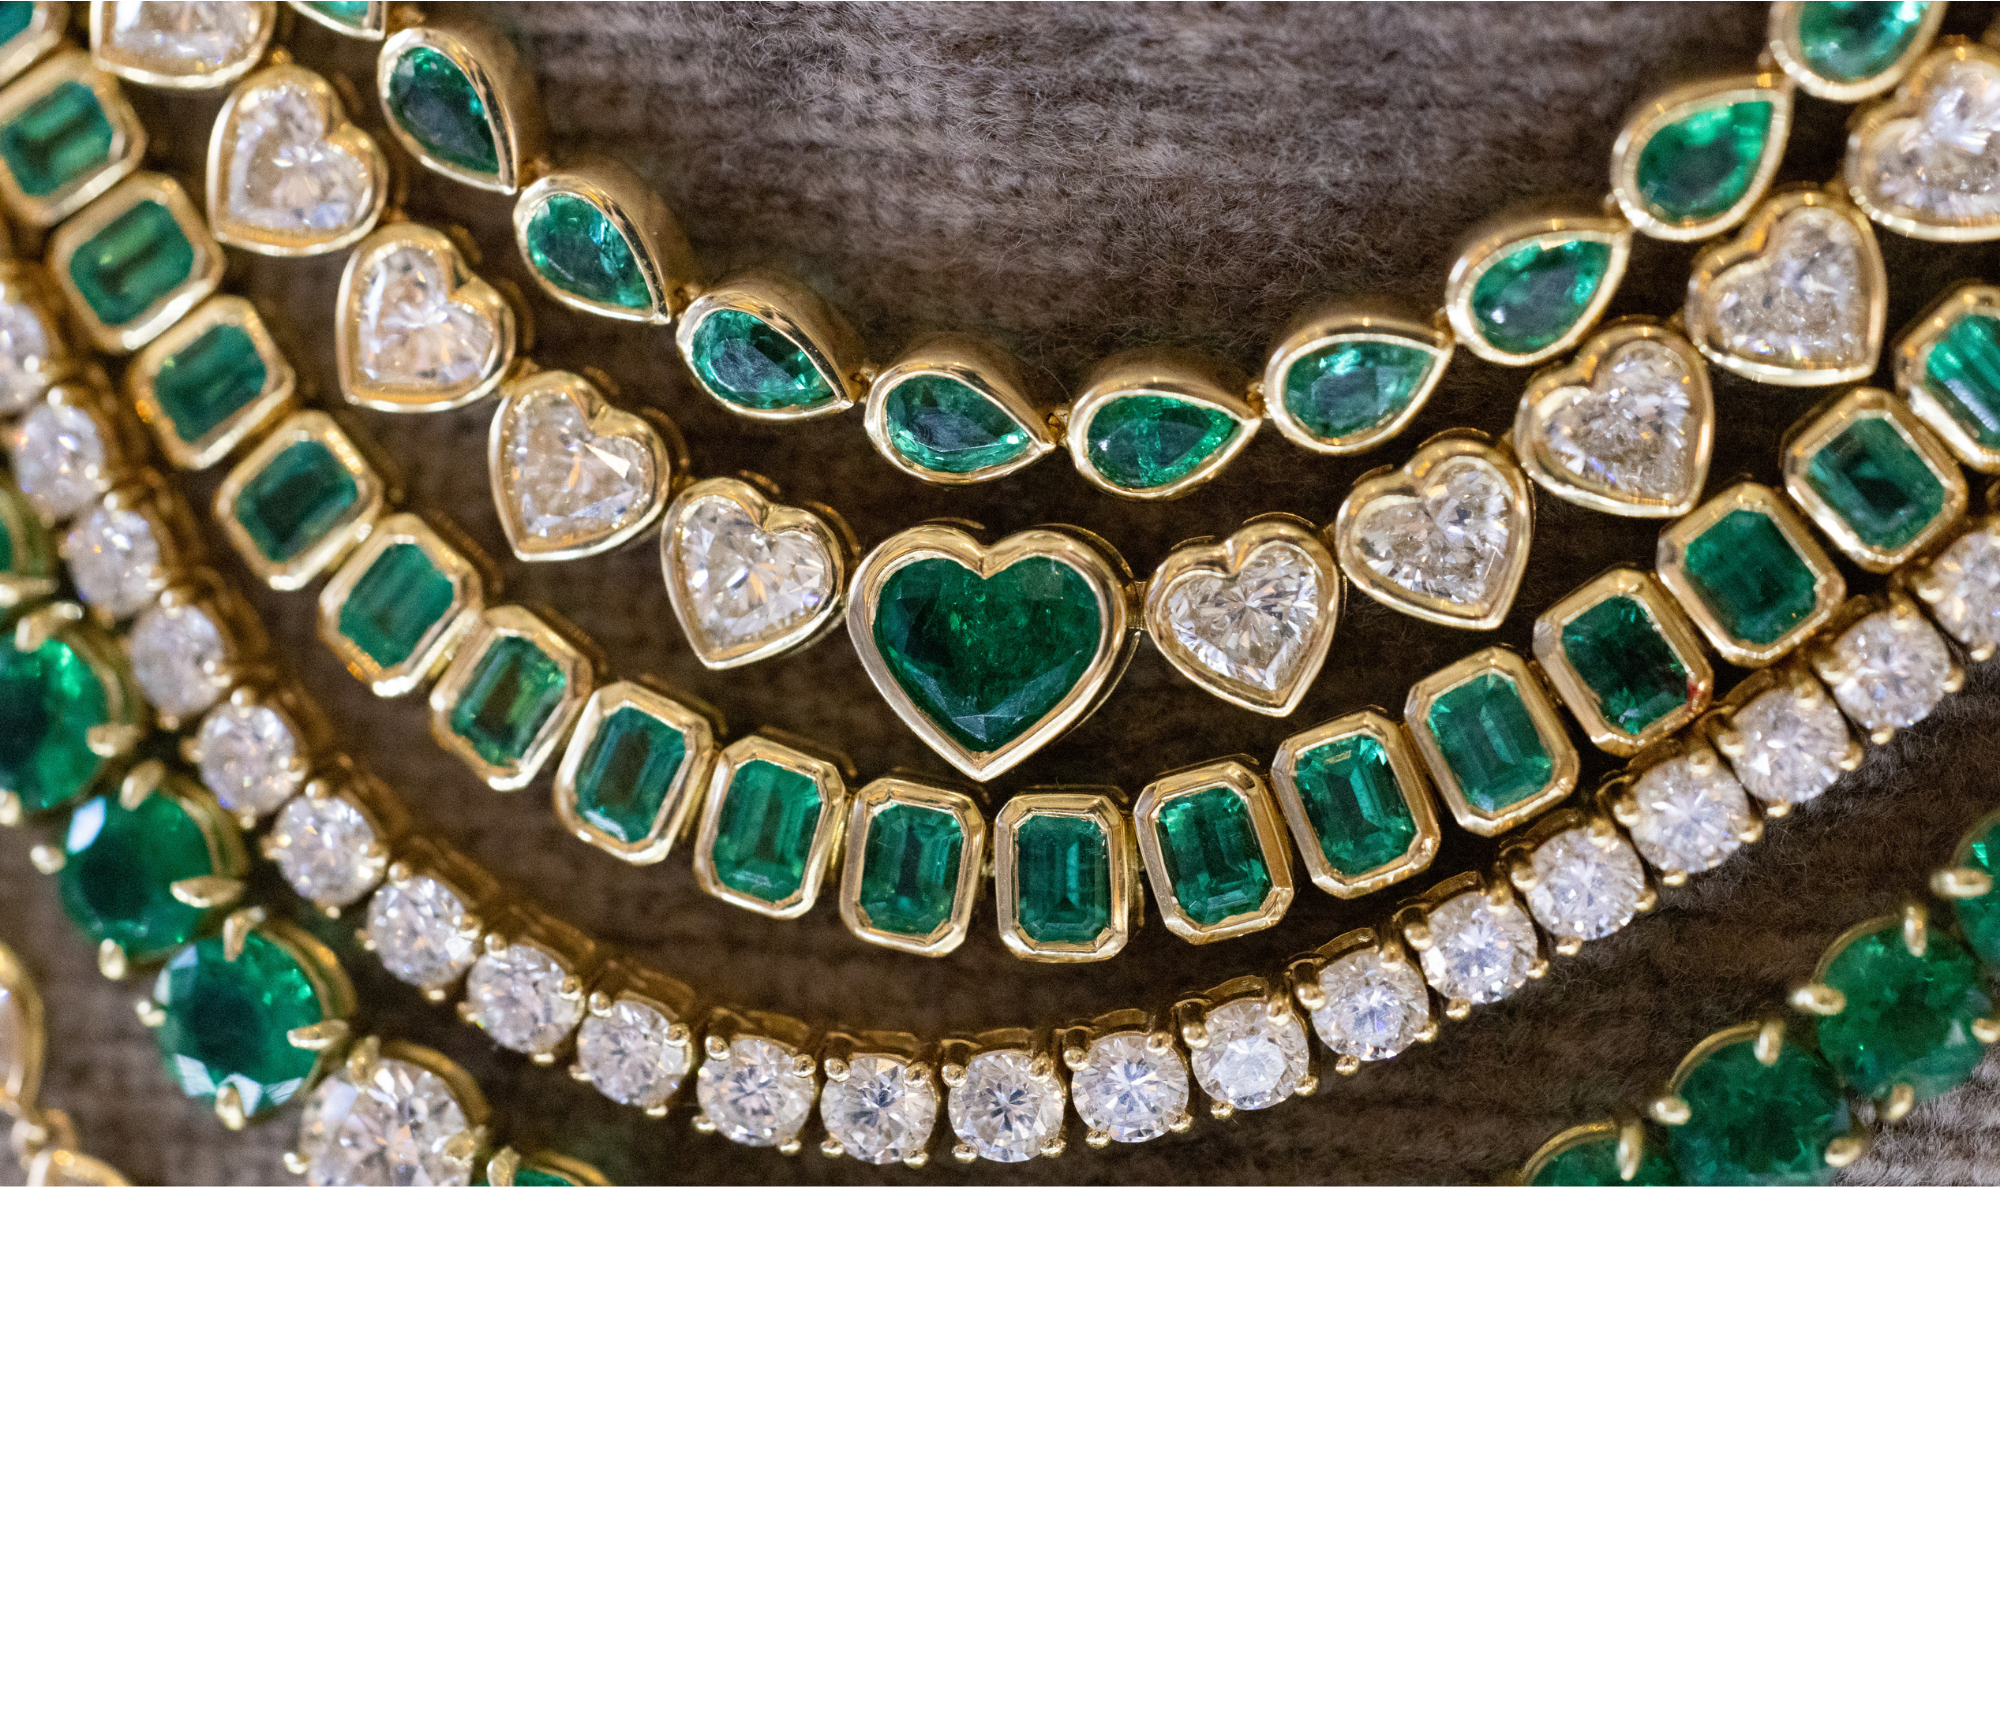 Emerald necklaces are coming soon to Anita Ko